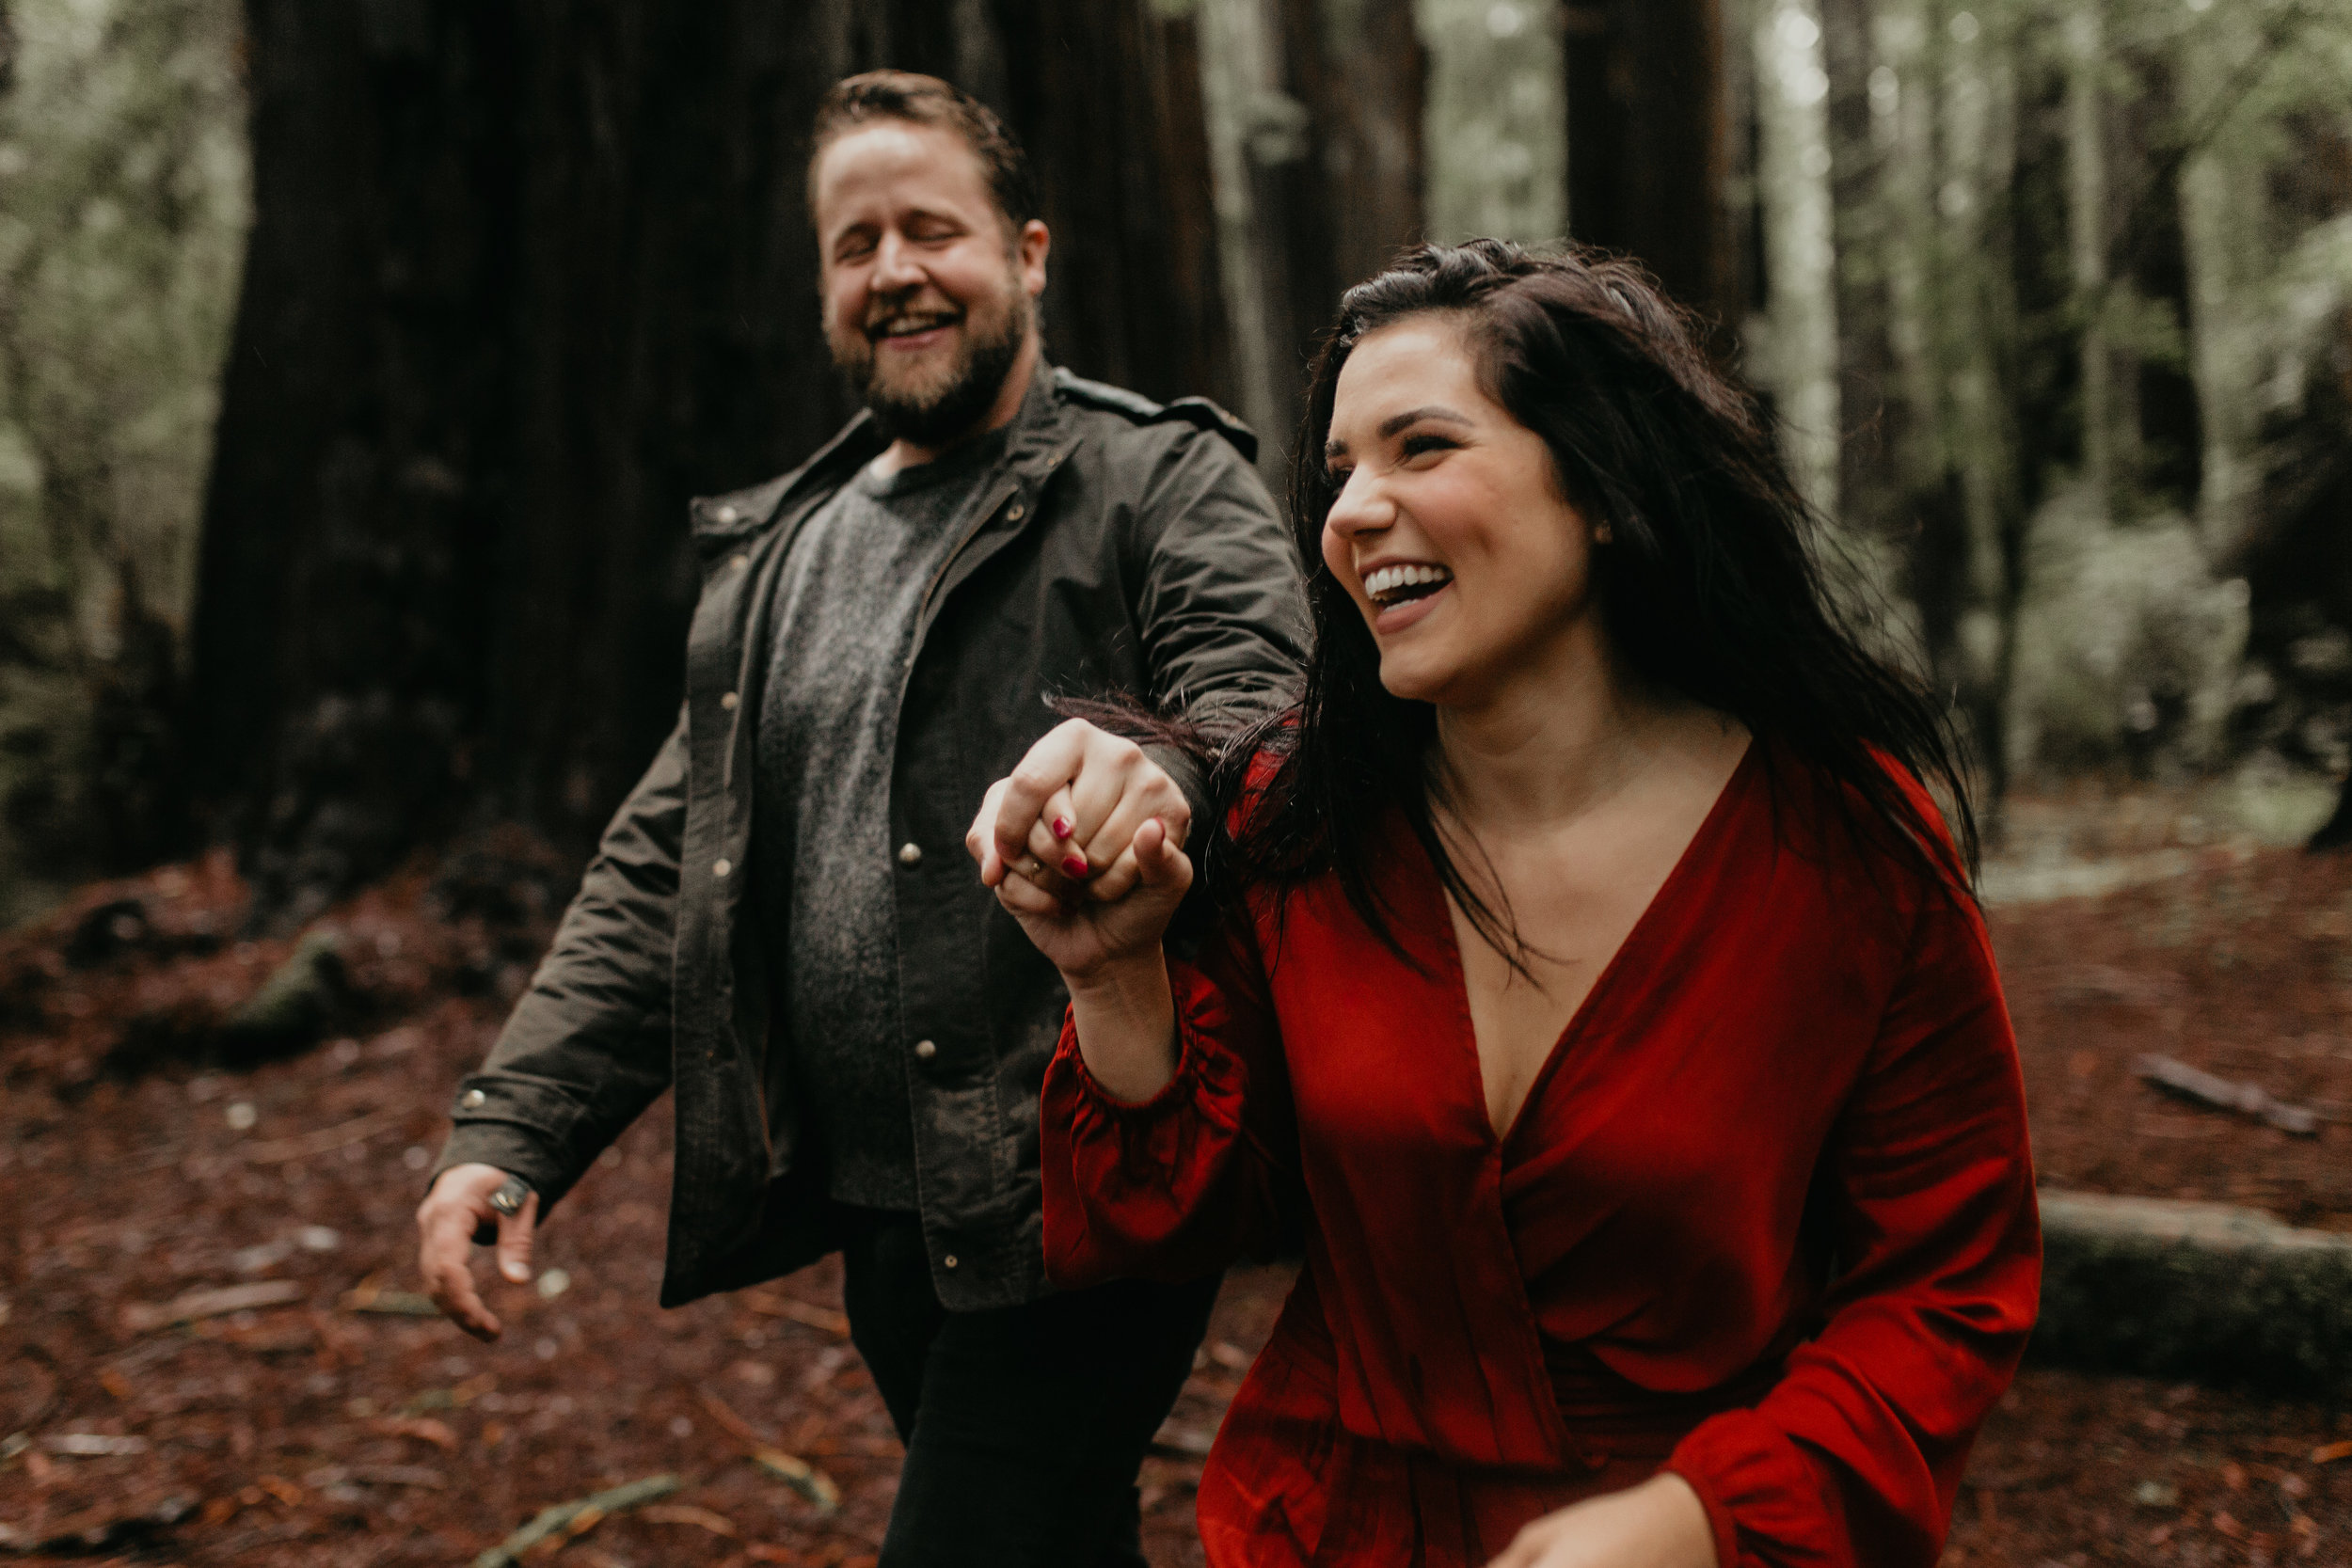 nicole-daacke-photography-redwoods-national-park-forest-rainy-foggy-adventure-engagement-session-humboldt-county-old-growth-redwood-tree-elopement-intimate-wedding-photographer-34.jpg